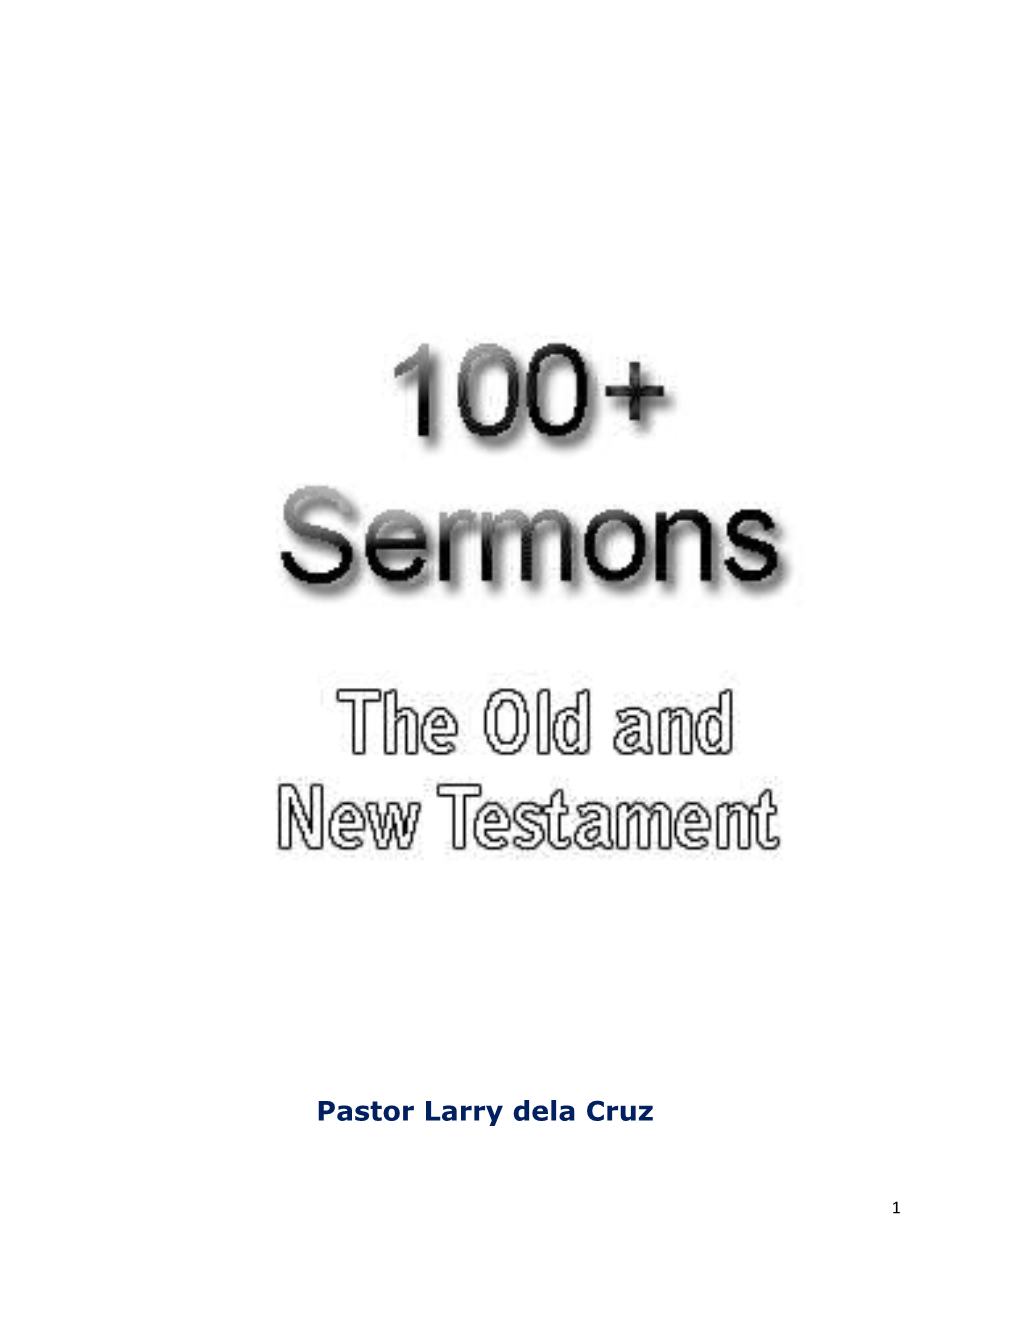 100+ Sermons the Old and New Testament